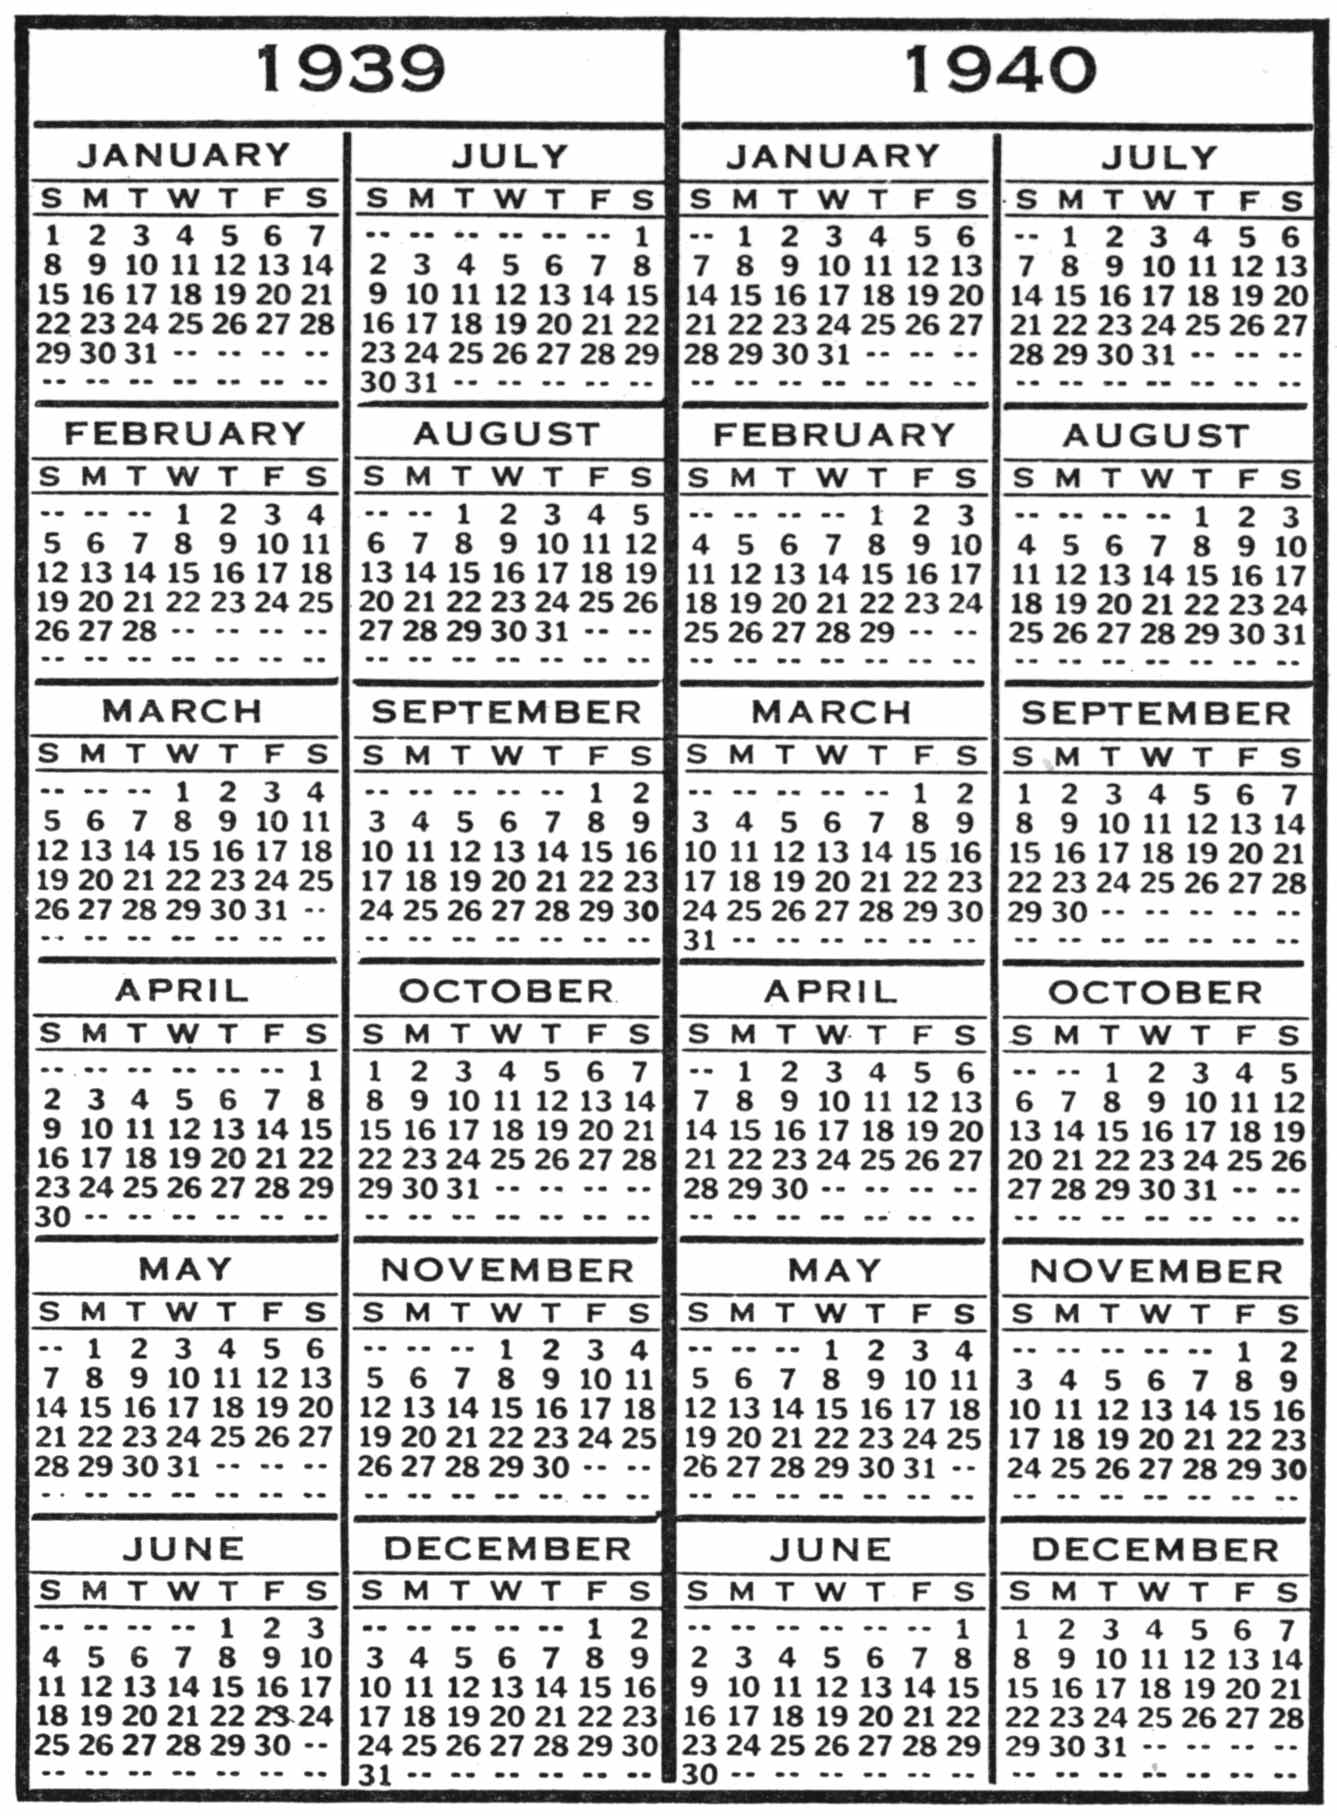 Calendar Grid for 1939 and 1940